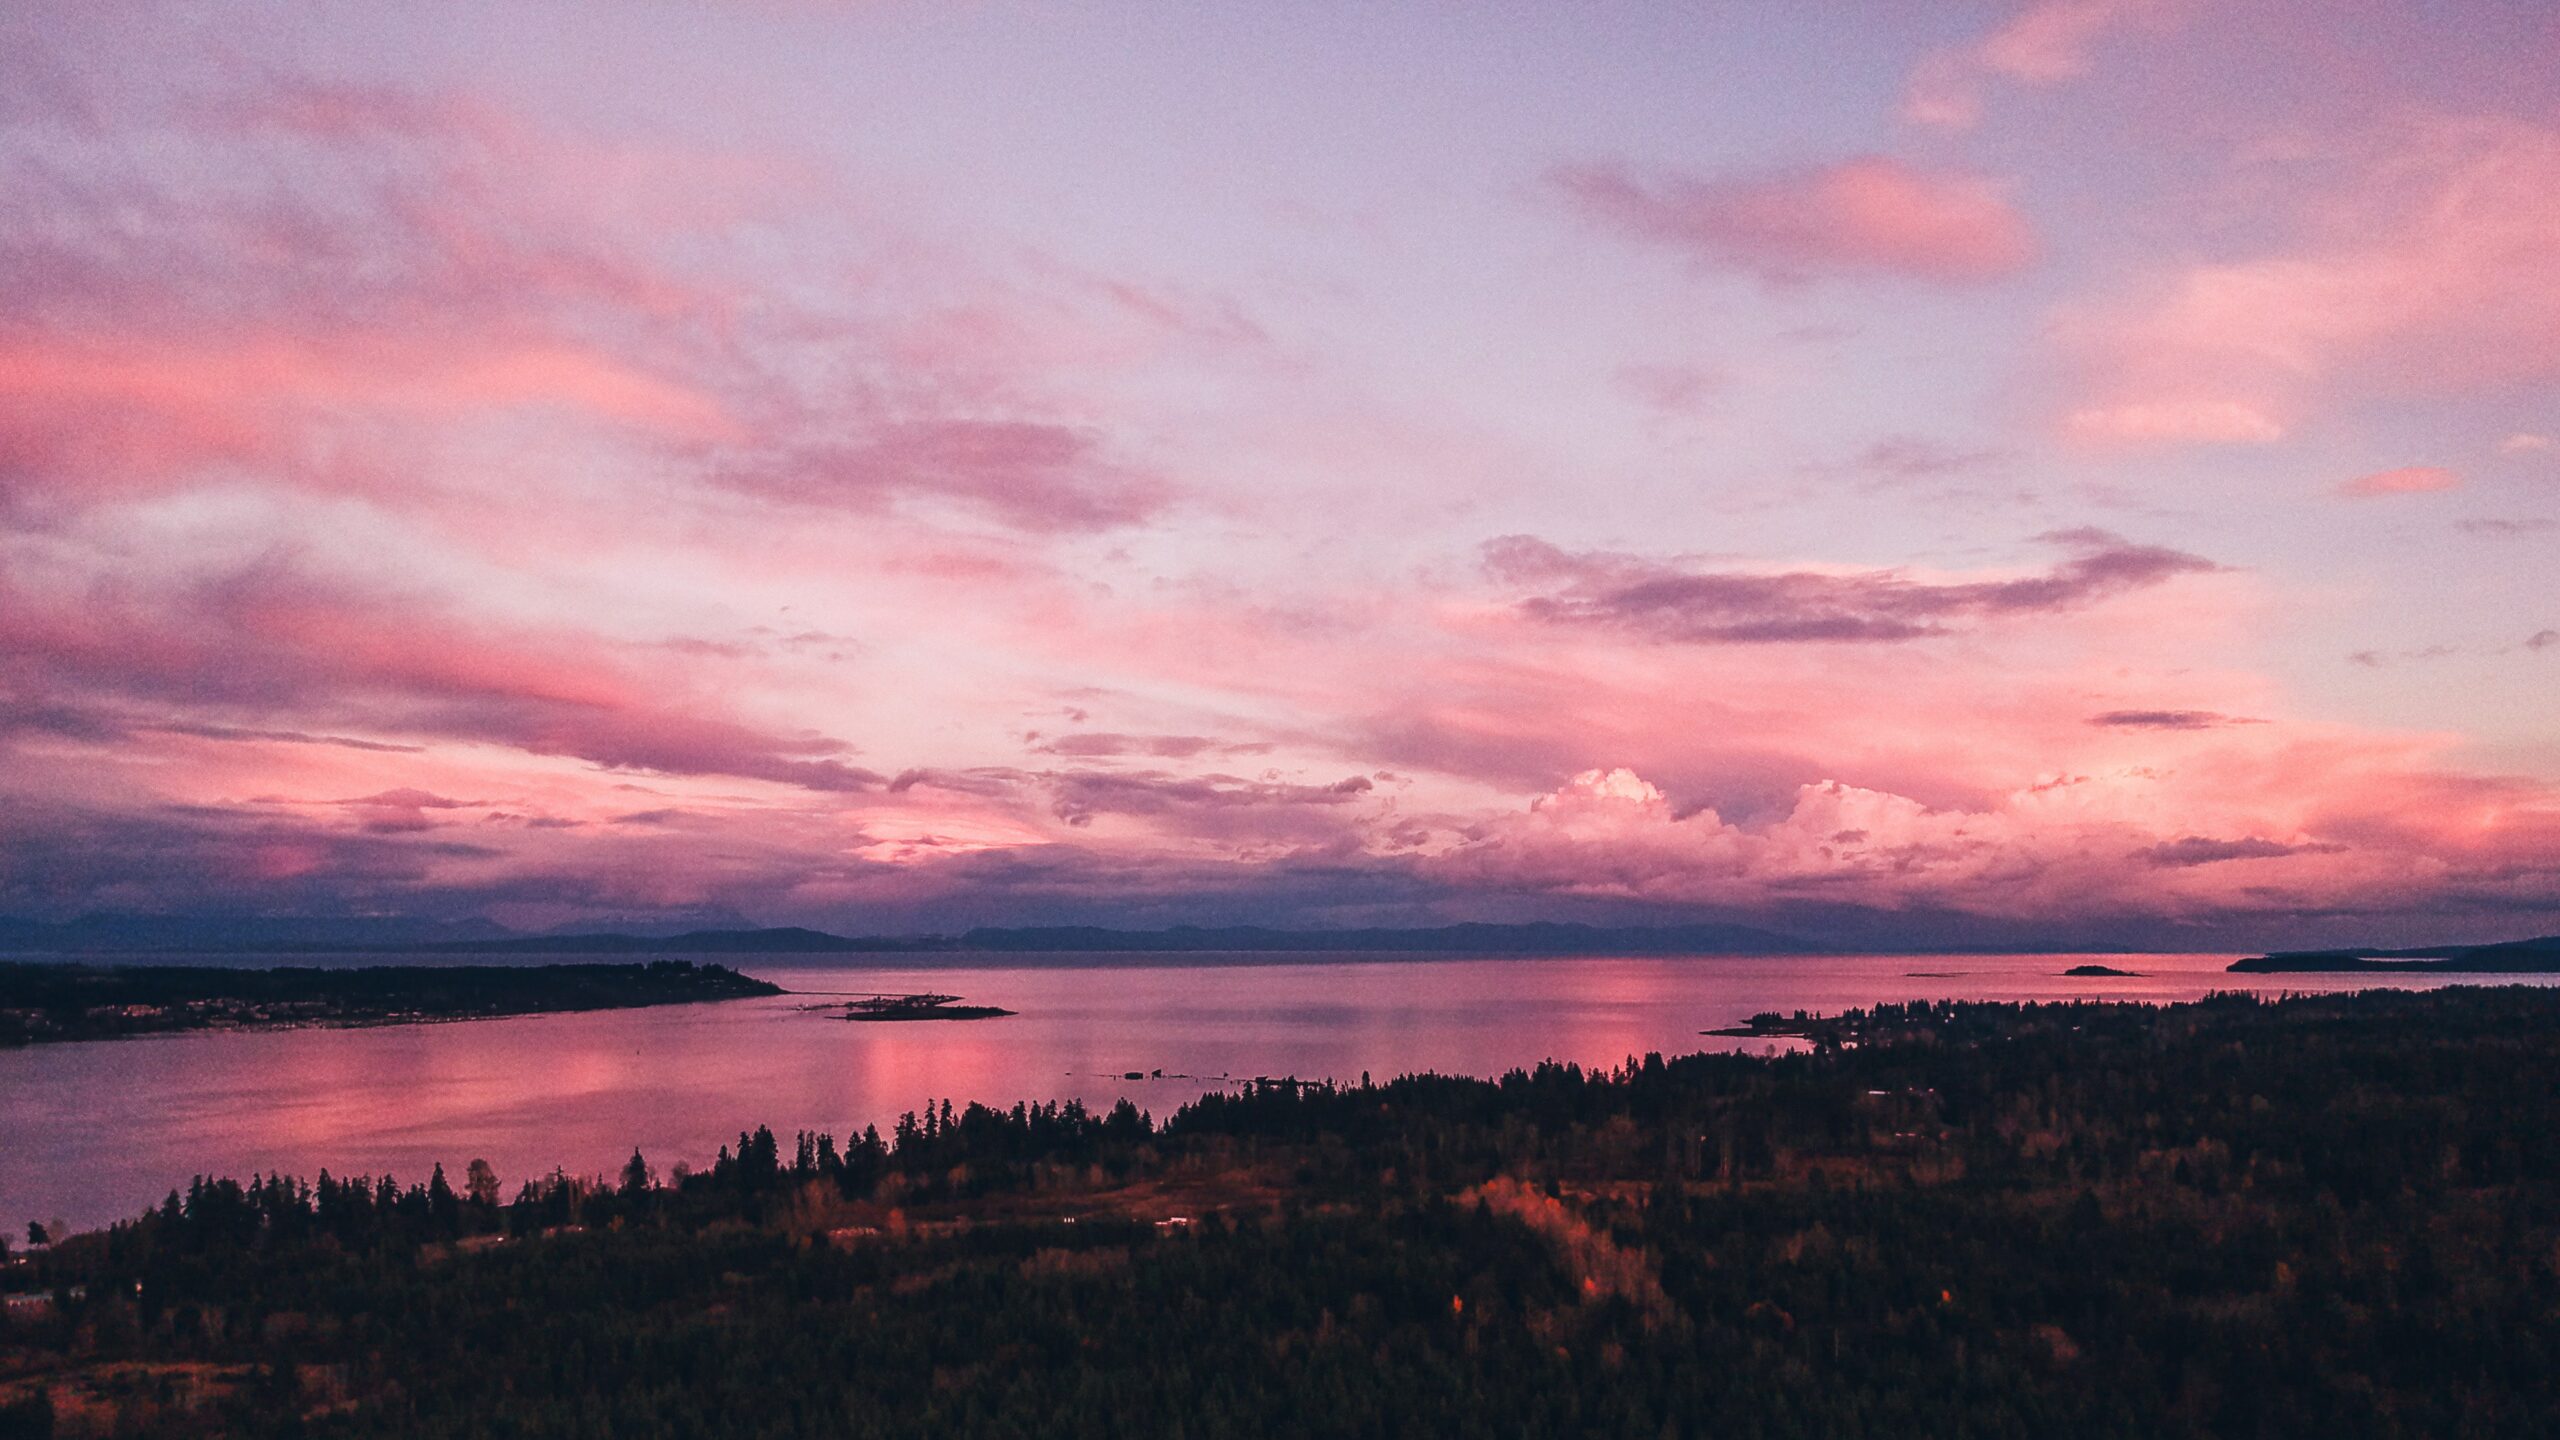 An aerial view of a pink sunset over the Comox Valley